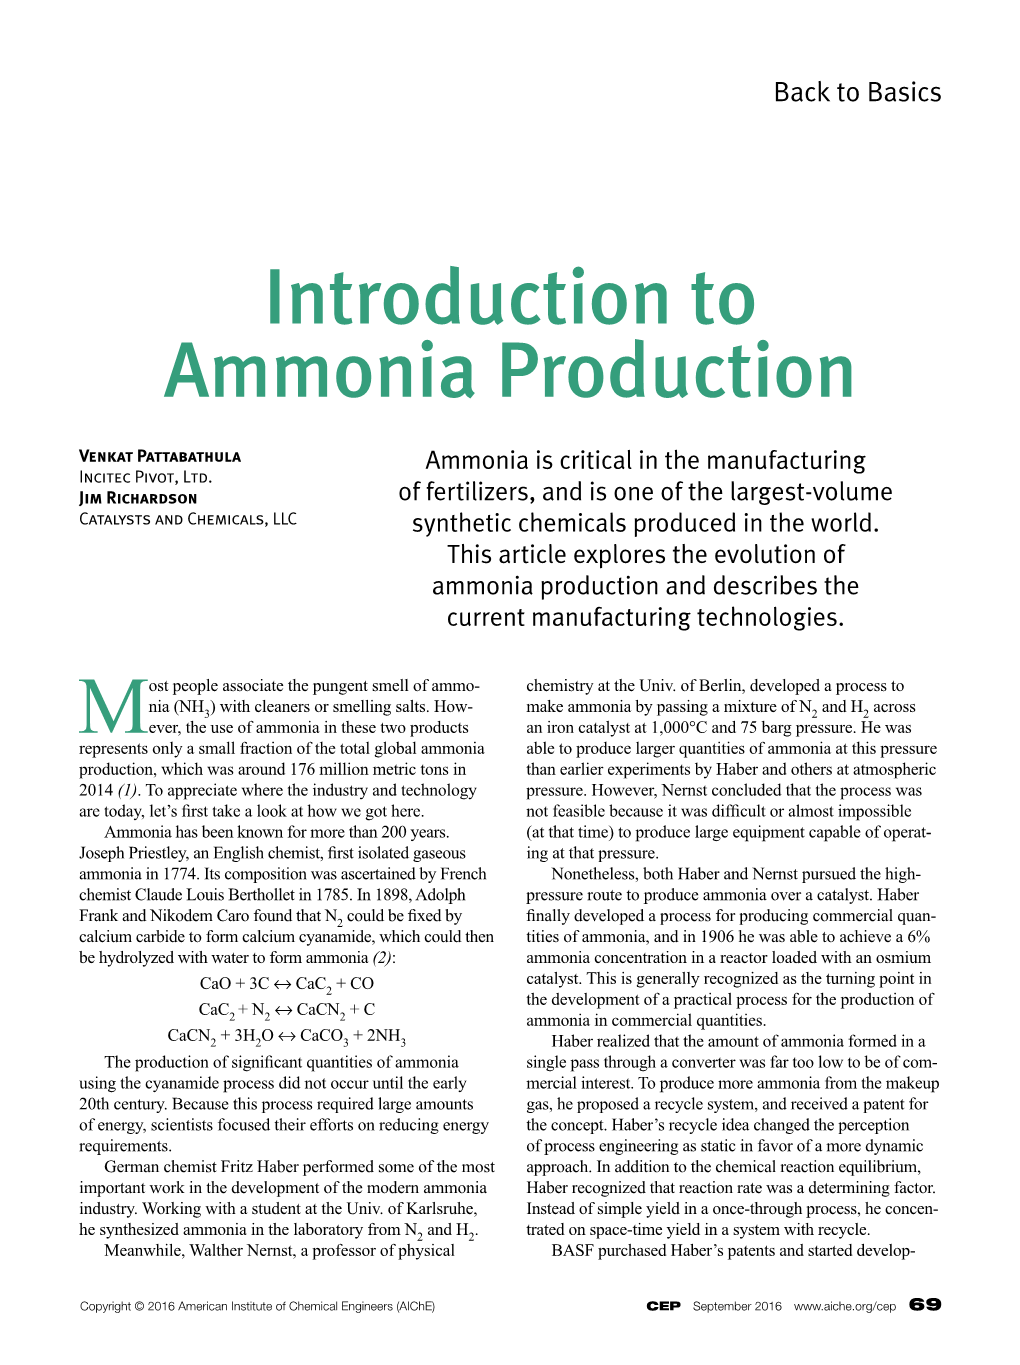 Introduction to Ammonia Production